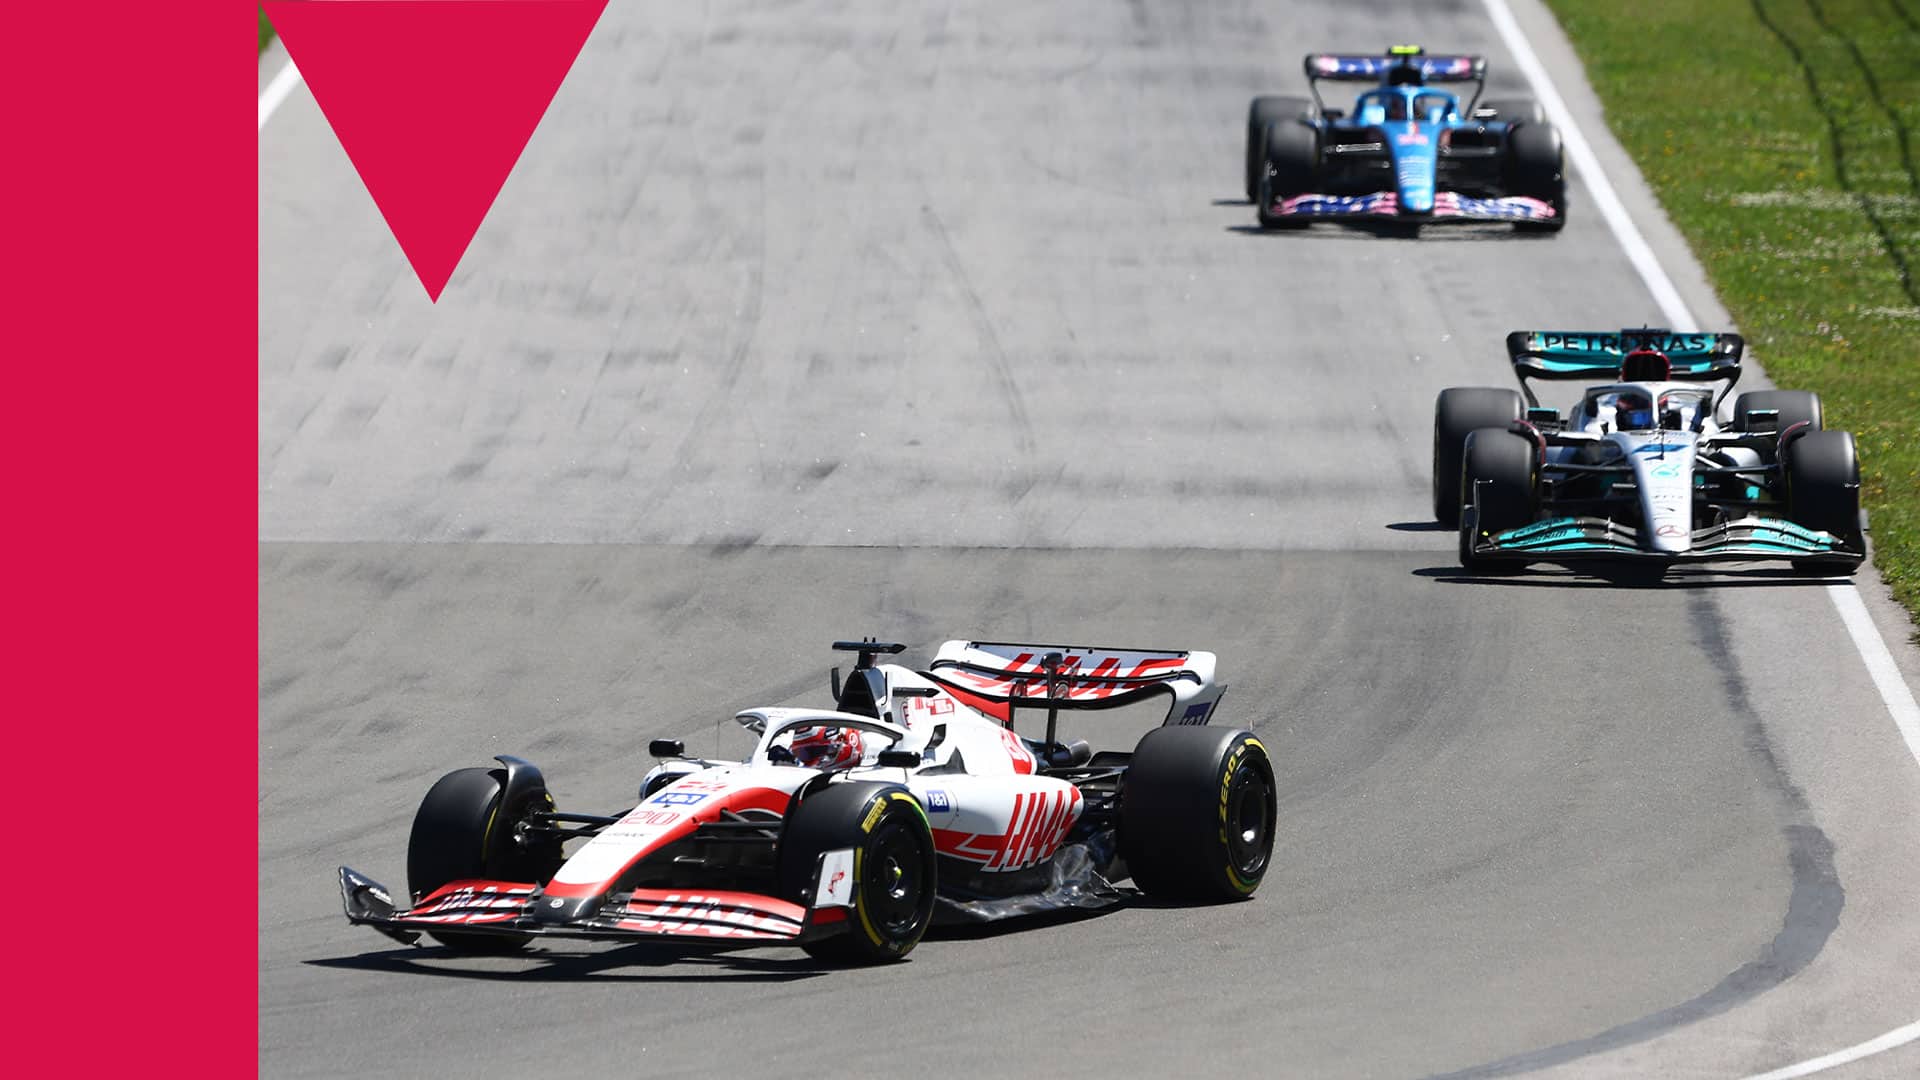 MONTREAL, QUEBEC - JUNE 19: Kevin Magnussen of Denmark driving the (20) Haas F1 VF-22 Ferrari leads George Russell of Great Britain driving the (63) Mercedes AMG Petronas F1 Team W13 during the F1 Grand Prix of Canada at Circuit Gilles Villeneuve on June 19, 2022 in Montreal, Quebec.  (Photo by Clive Rose/Getty Images)